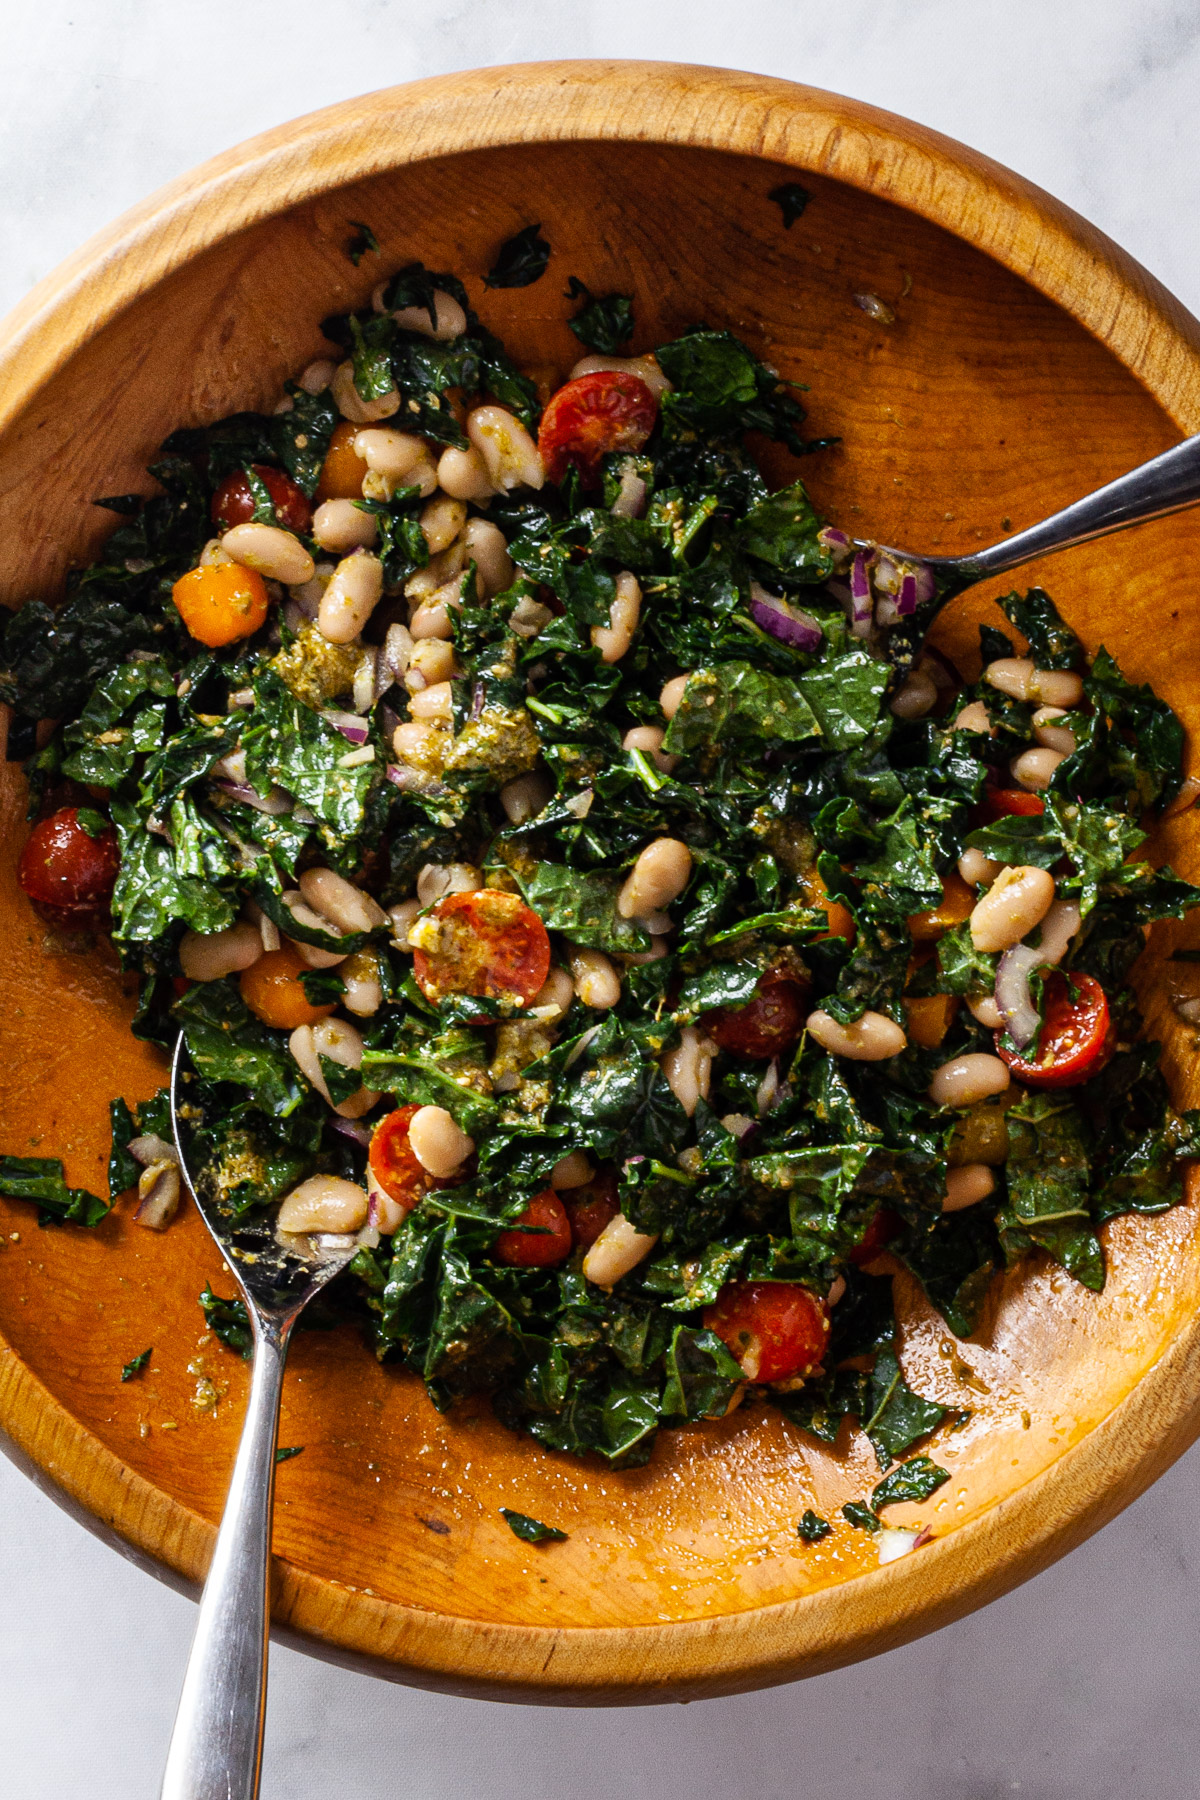 Kale And White Bean Salad With Pesto Dressing